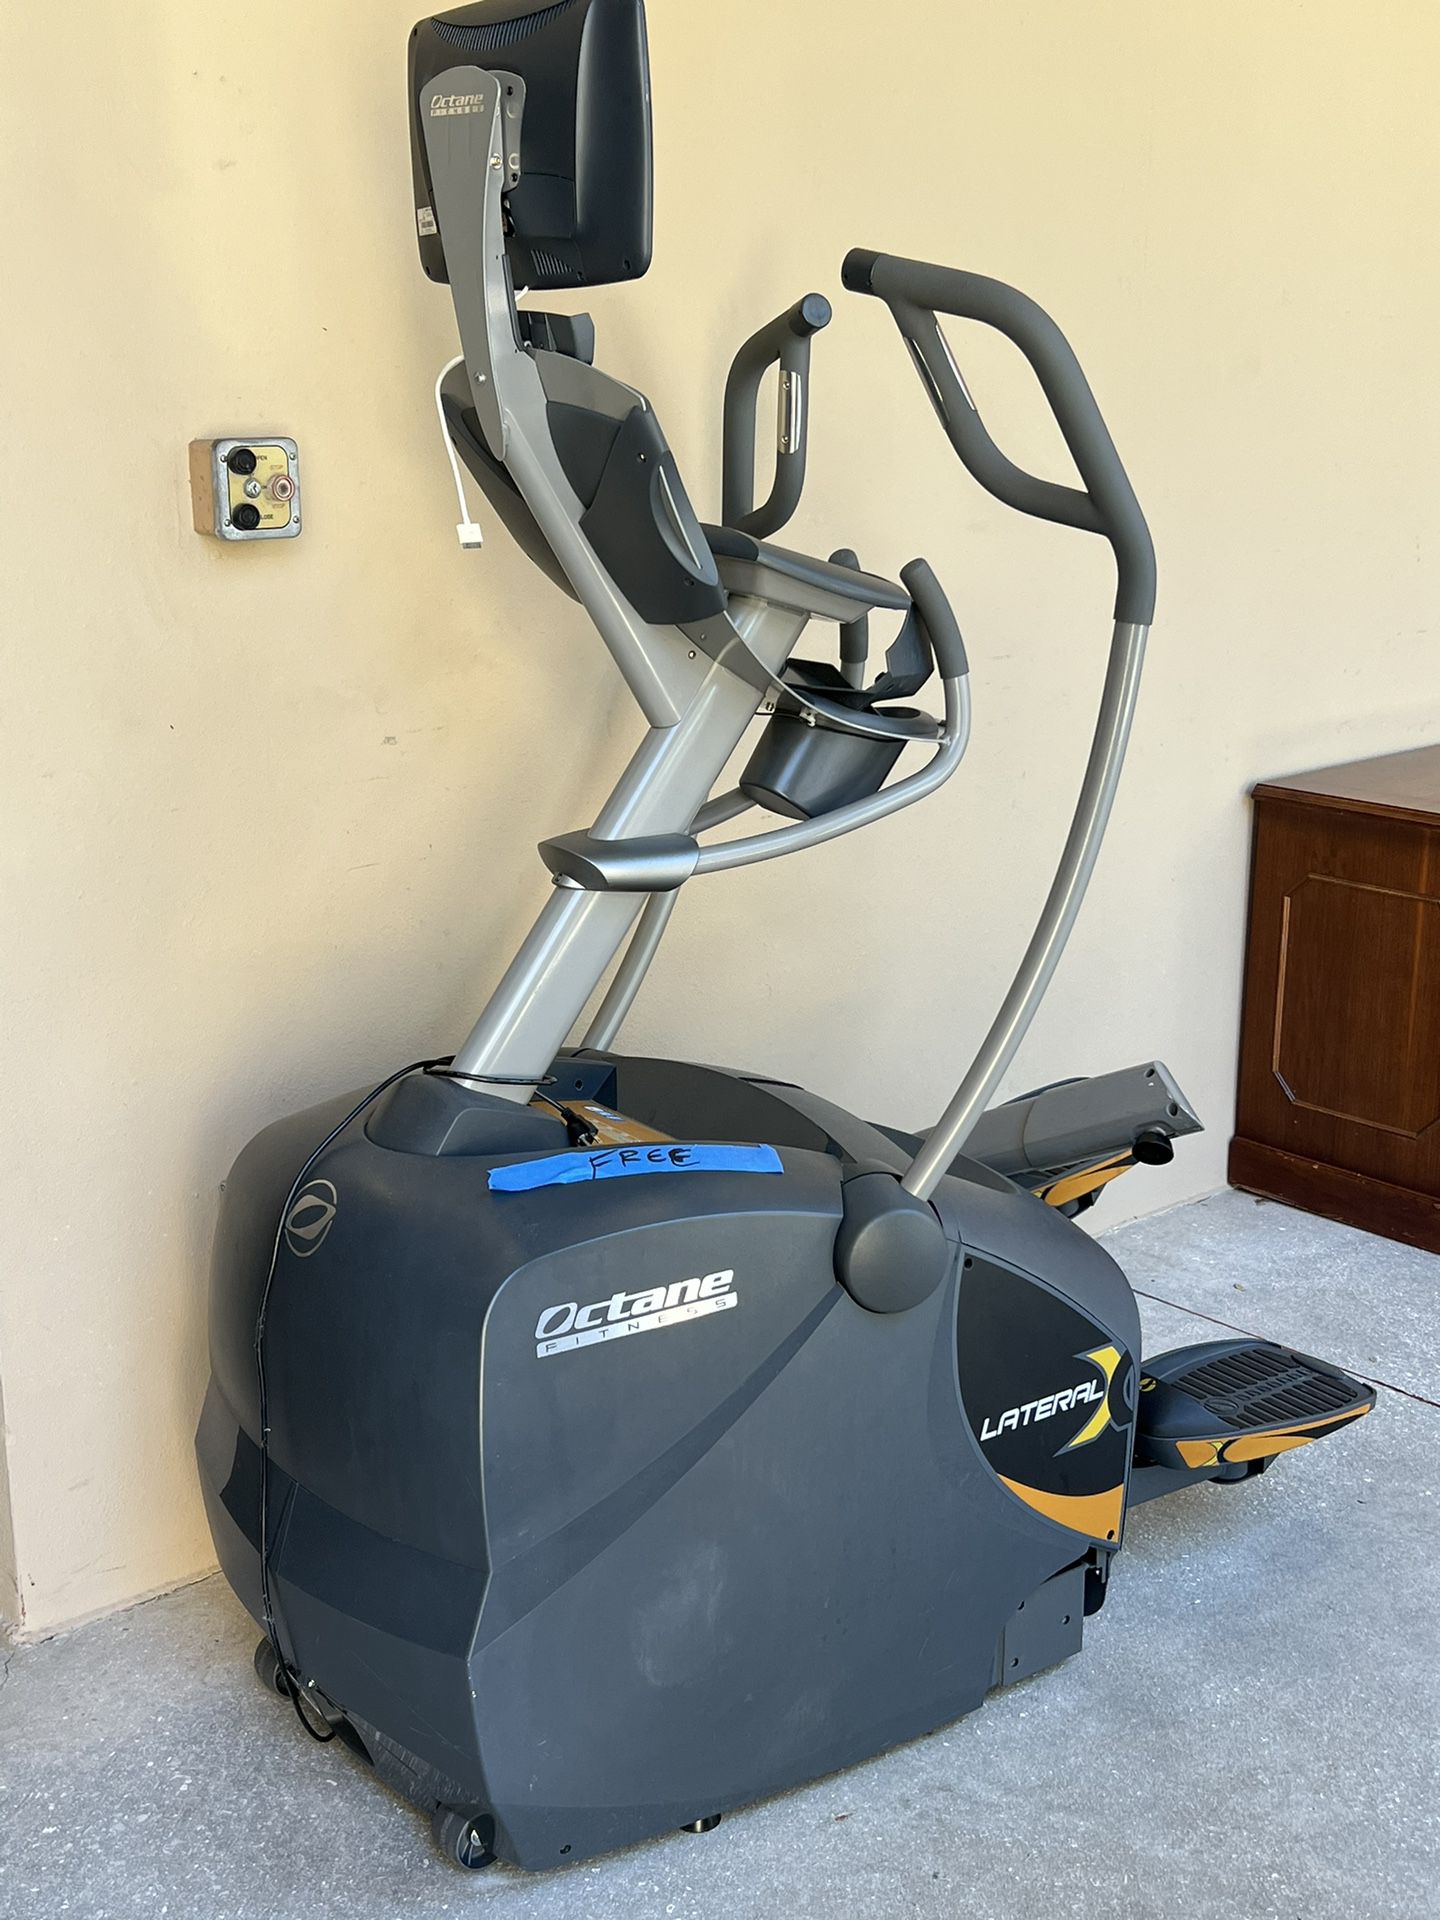 Elliptical Octane LX8000 Lateral Trainer